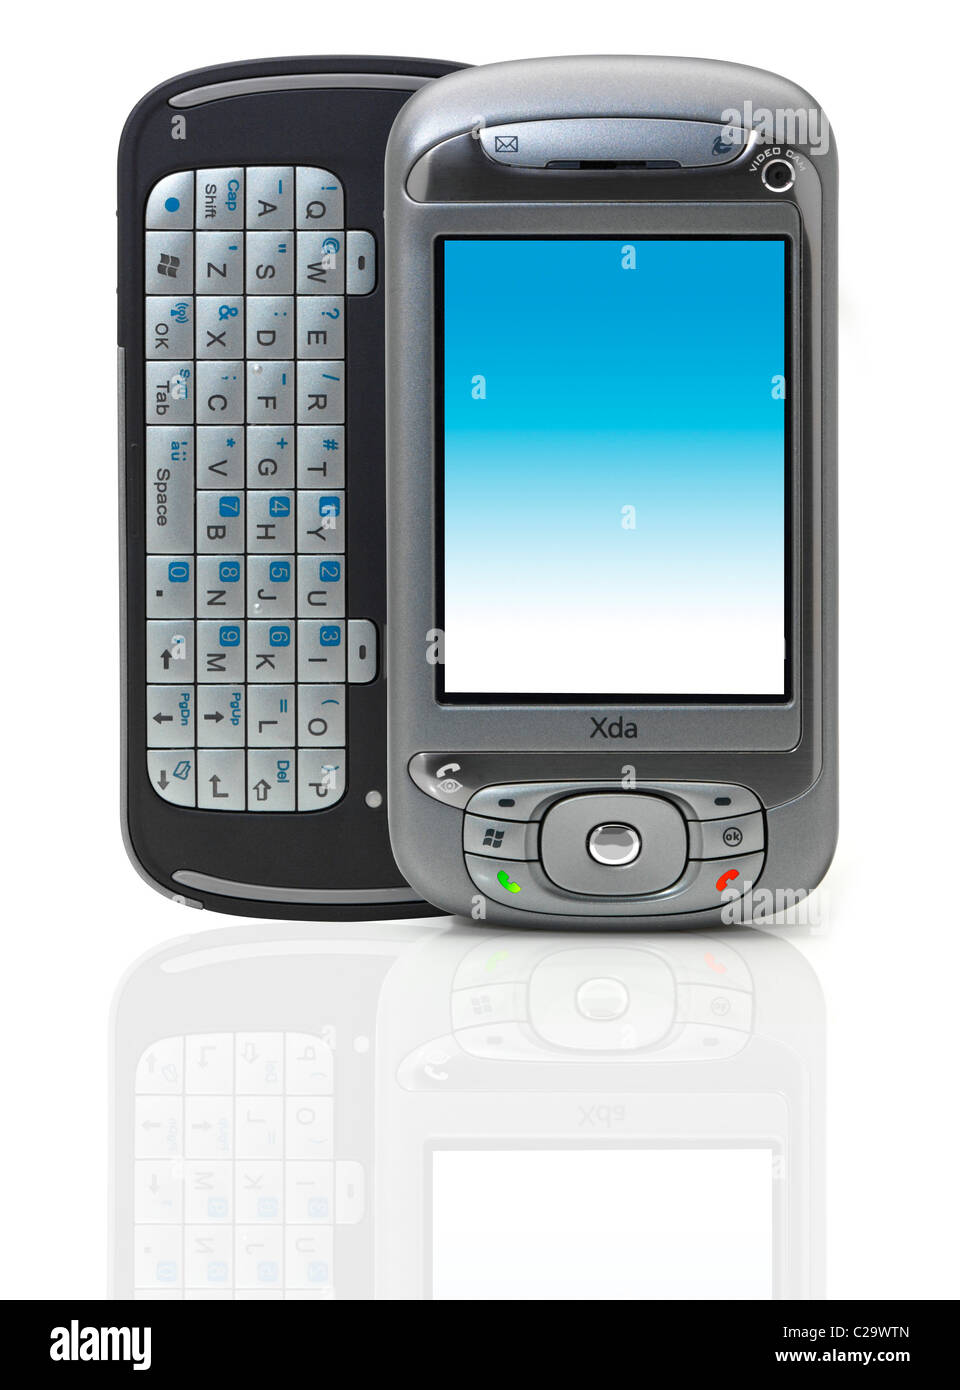 XDa Tion mobile phone with slide out keyboard Stock Photo